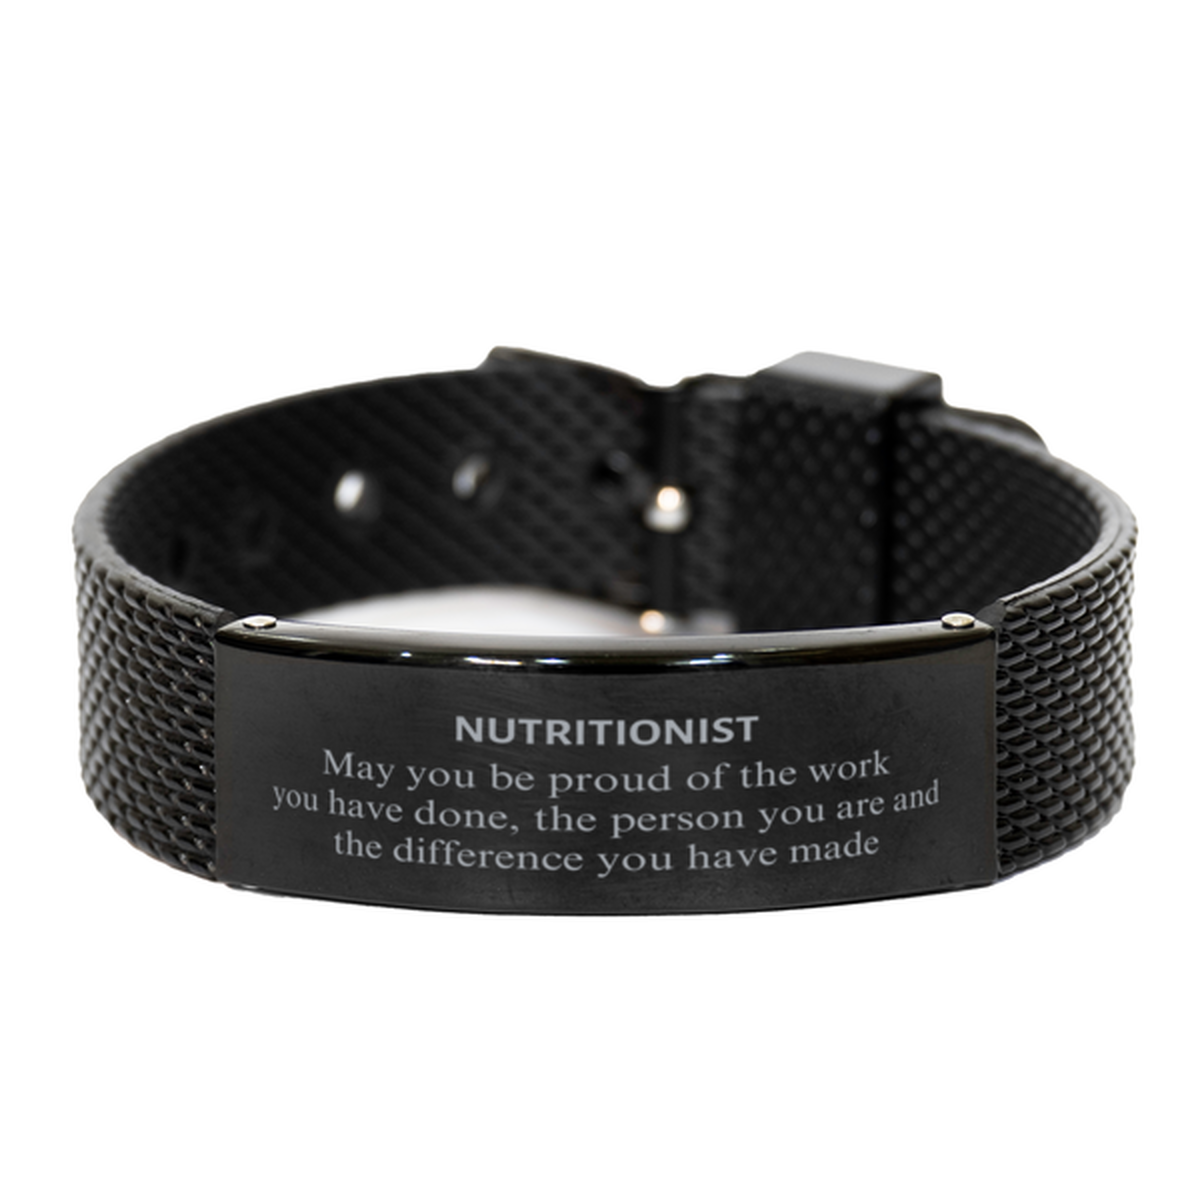 Nutritionist May you be proud of the work you have done, Retirement Nutritionist Black Shark Mesh Bracelet for Colleague Appreciation Gifts Amazing for Nutritionist